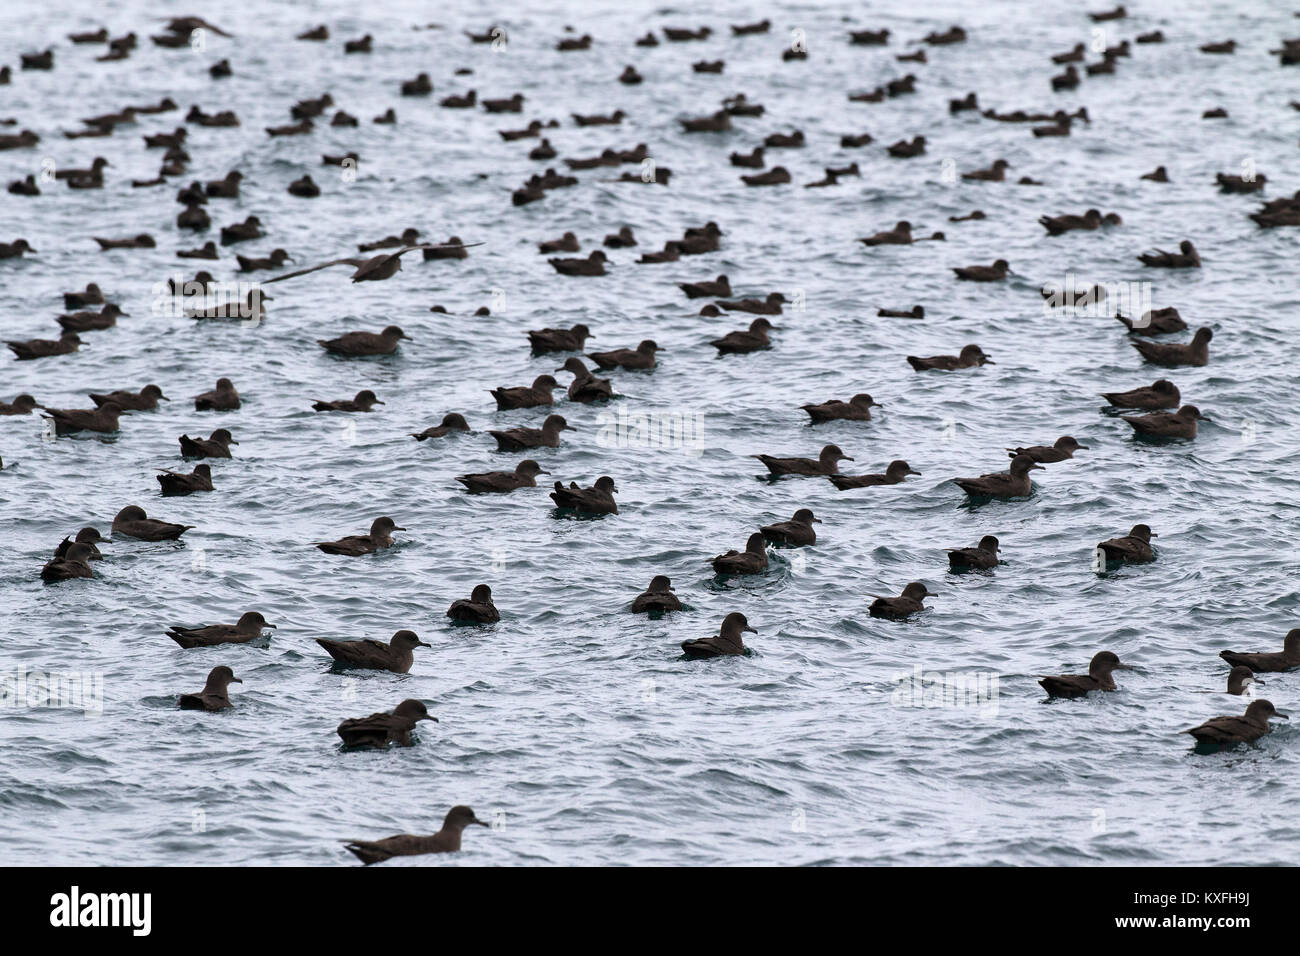 Sooty shearwater Puffinus griseus flock off Kidney Island, Falkland Islands in the Southern Atlantic Ocean Stock Photo